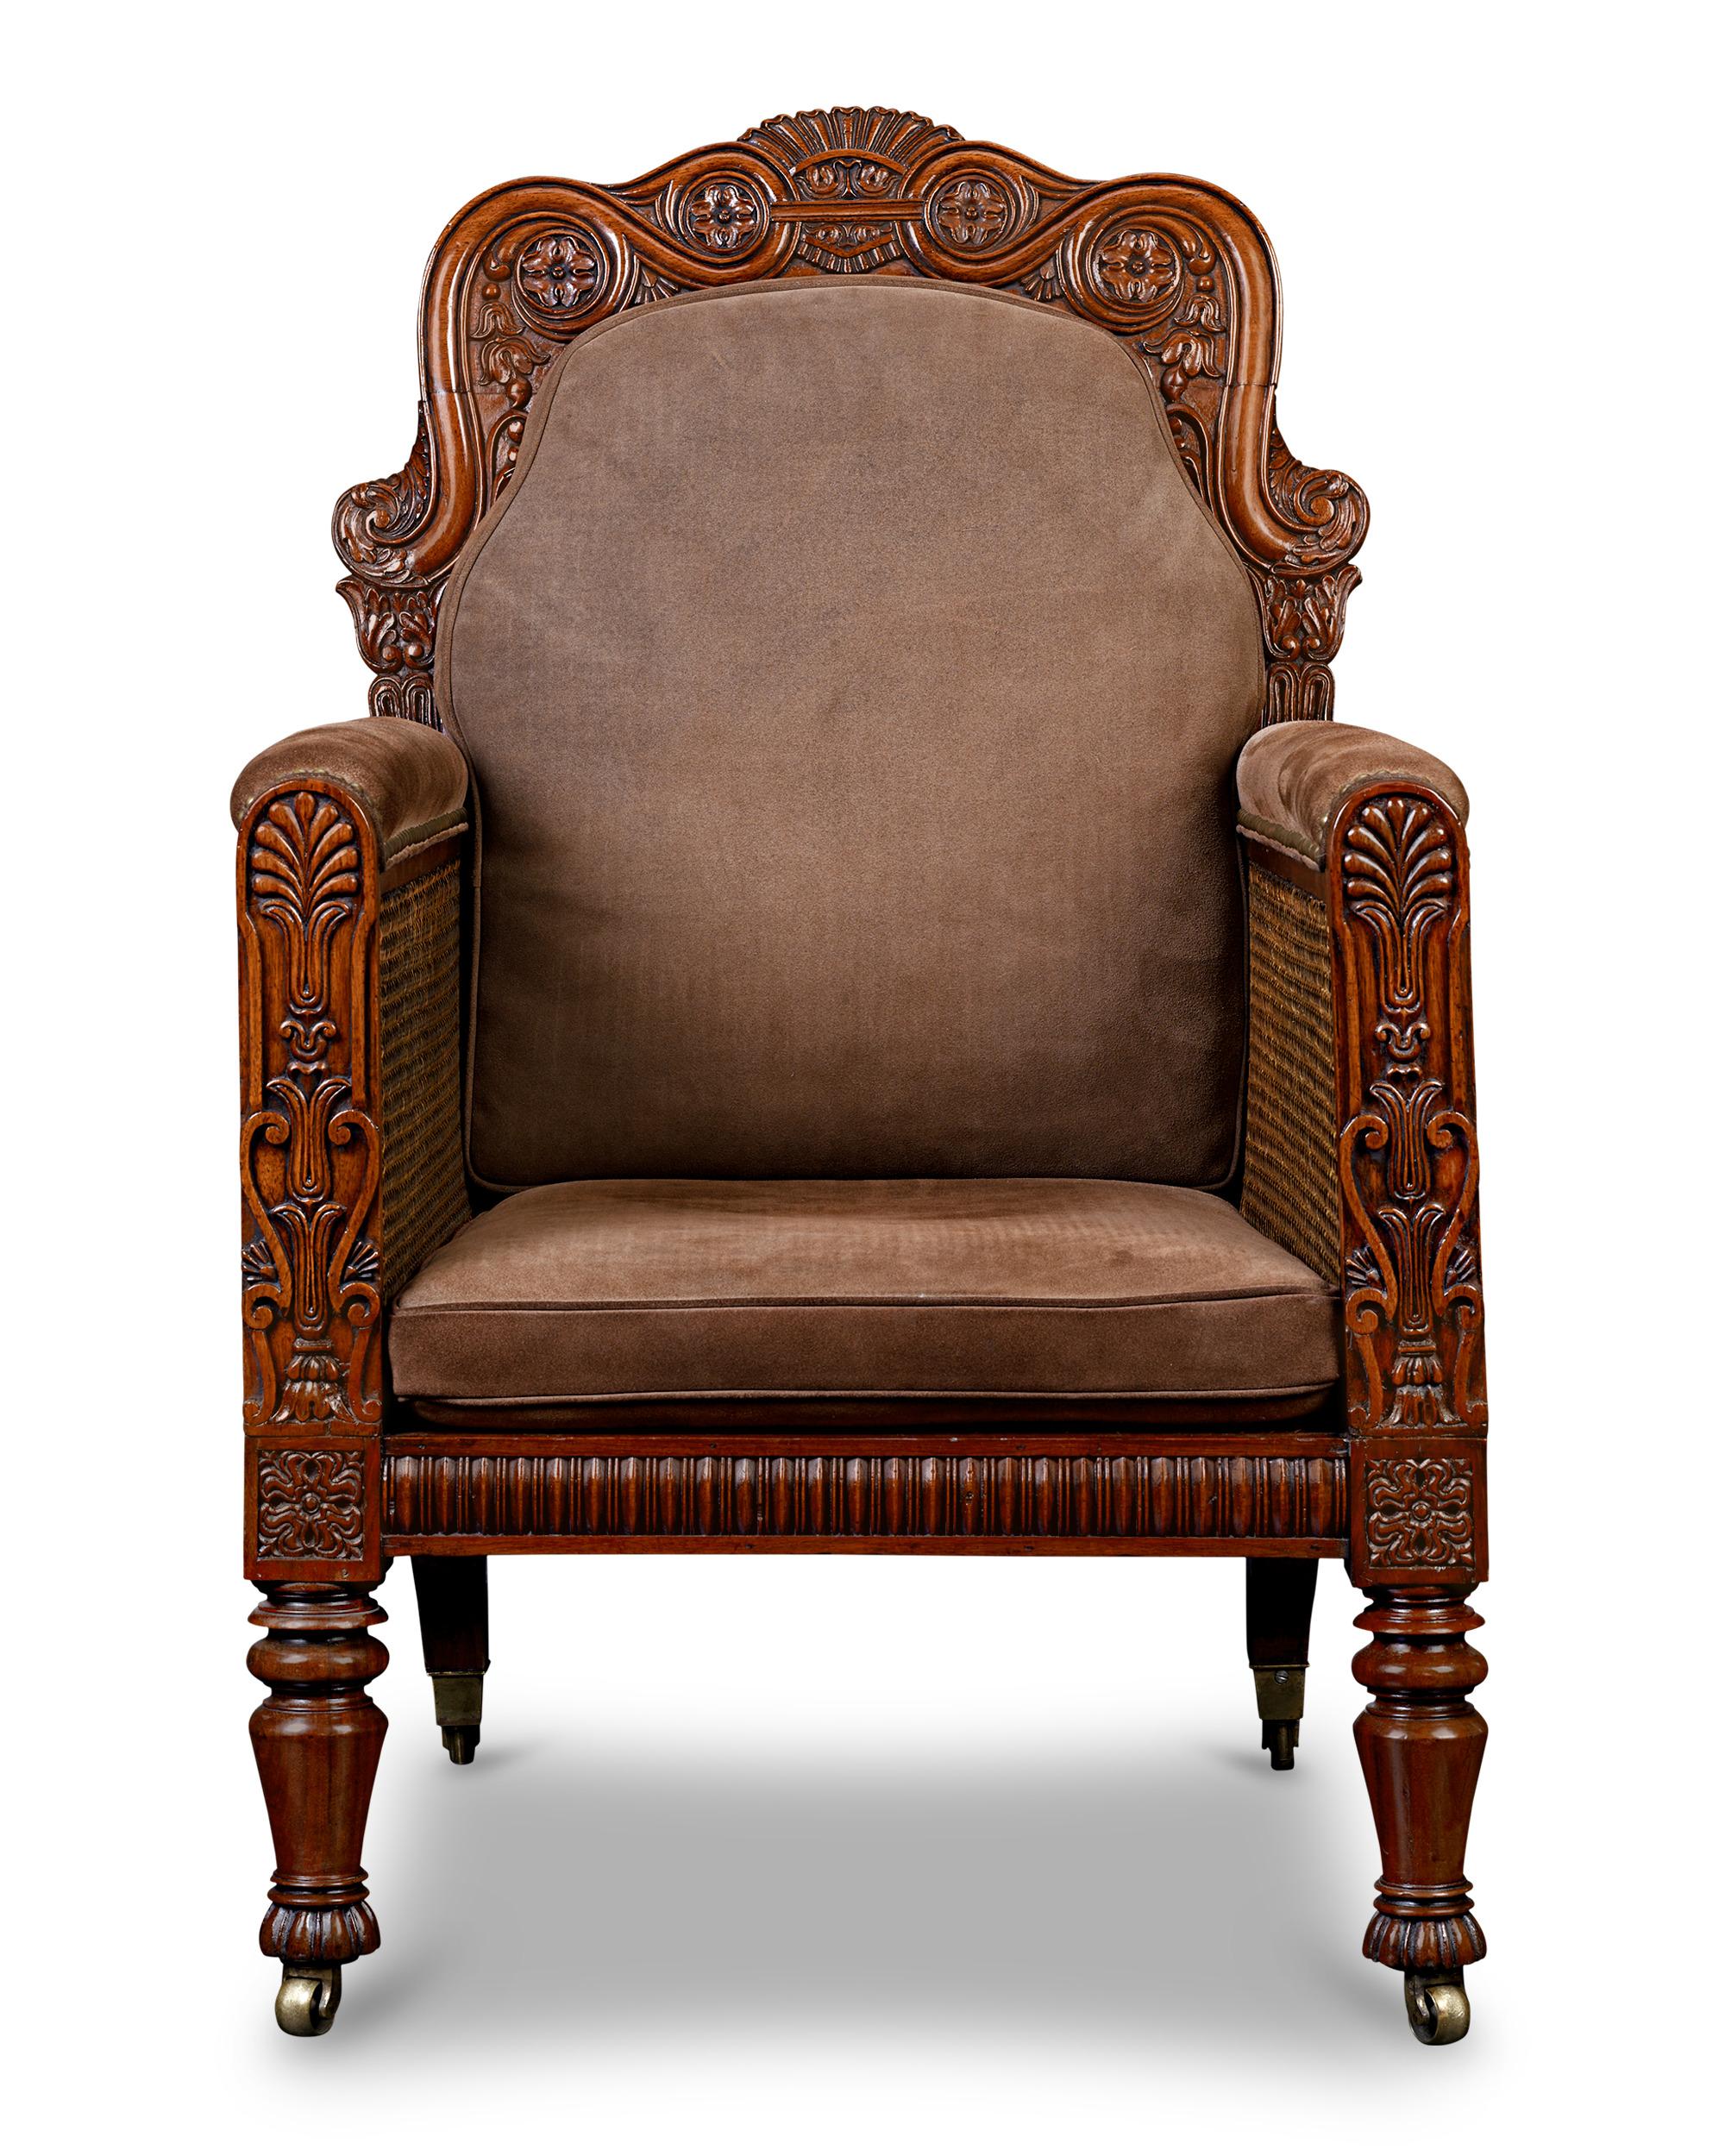 This stately George IV bergère armchair with caning details exudes elegance and sophistication. The armchair is crafted from walnut and features carved details and decorative elements, reflecting the neoclassical and Regency influences of the time.